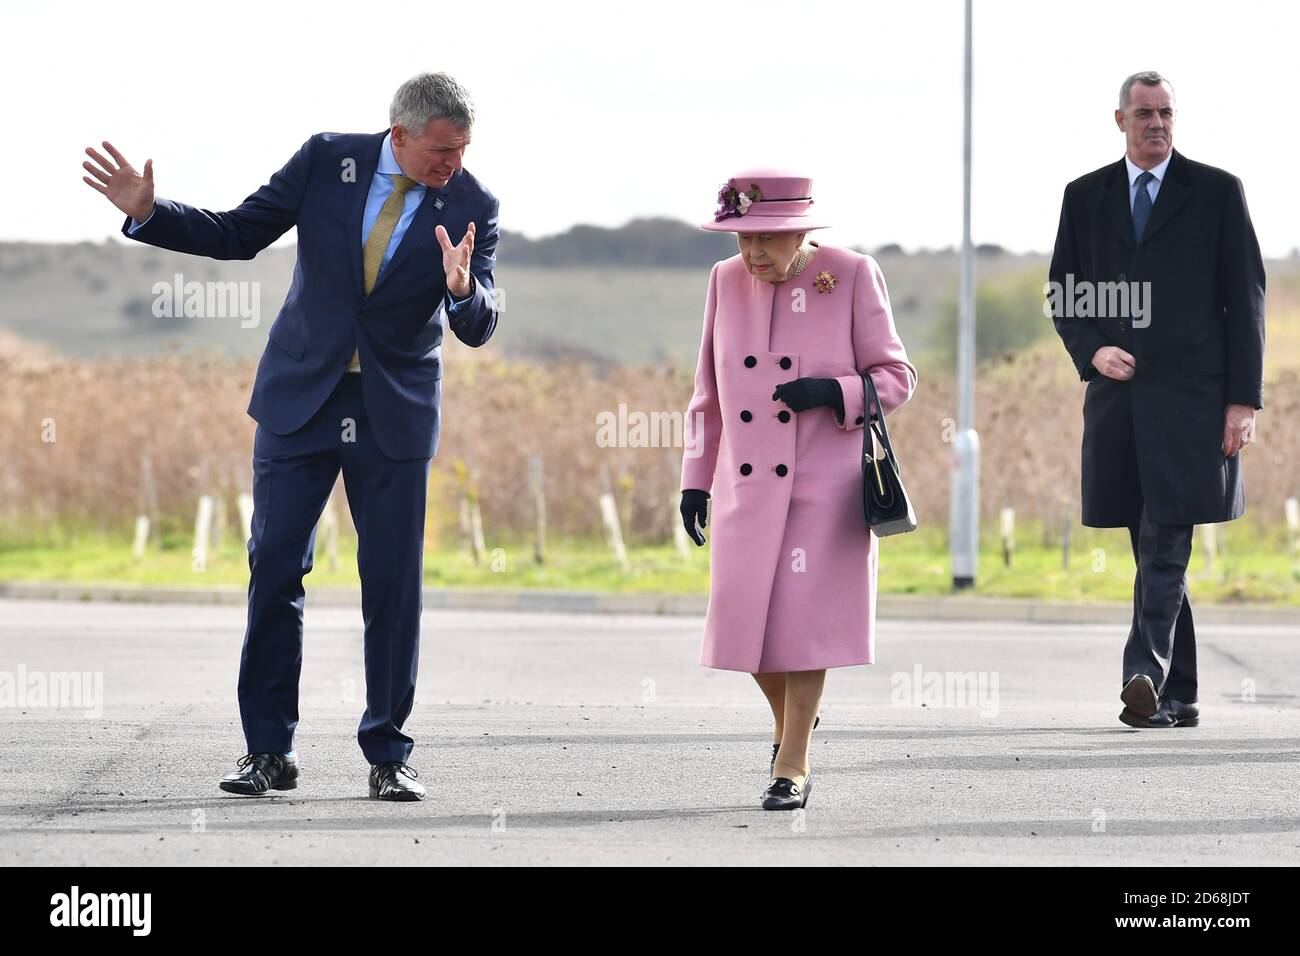 Queen Elizabeth II is greeted by Chief Executive Gary Aitkenhead as she arrives for a visit to the Defence Science and Technology Laboratory (DSTL) at Porton Down, Wiltshire, to view the Energetics Enclosure and display of weaponry and tactics used in counter intelligence, and meet staff who were involved in the Salisbury Novichok incident. Stock Photo